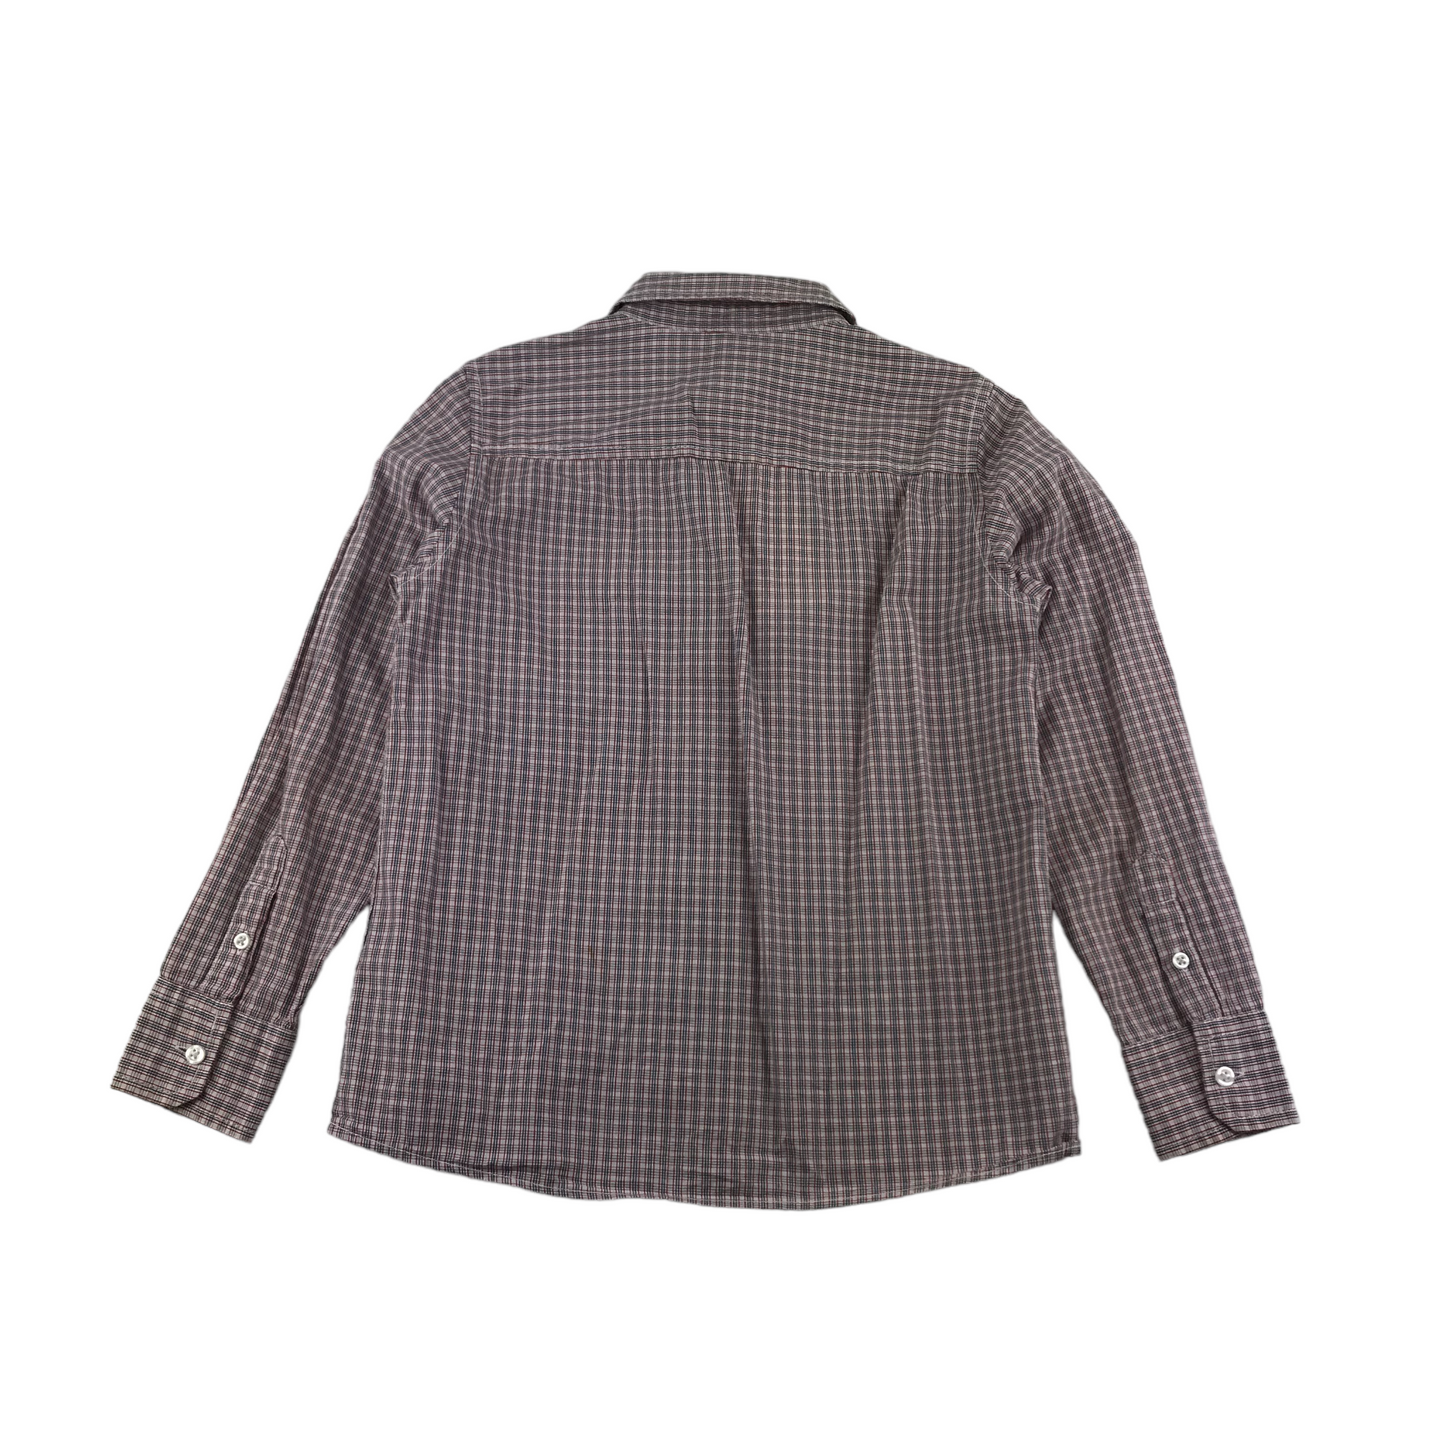 Benetton Shirt Age 8-9 Red Blue Check Cotton